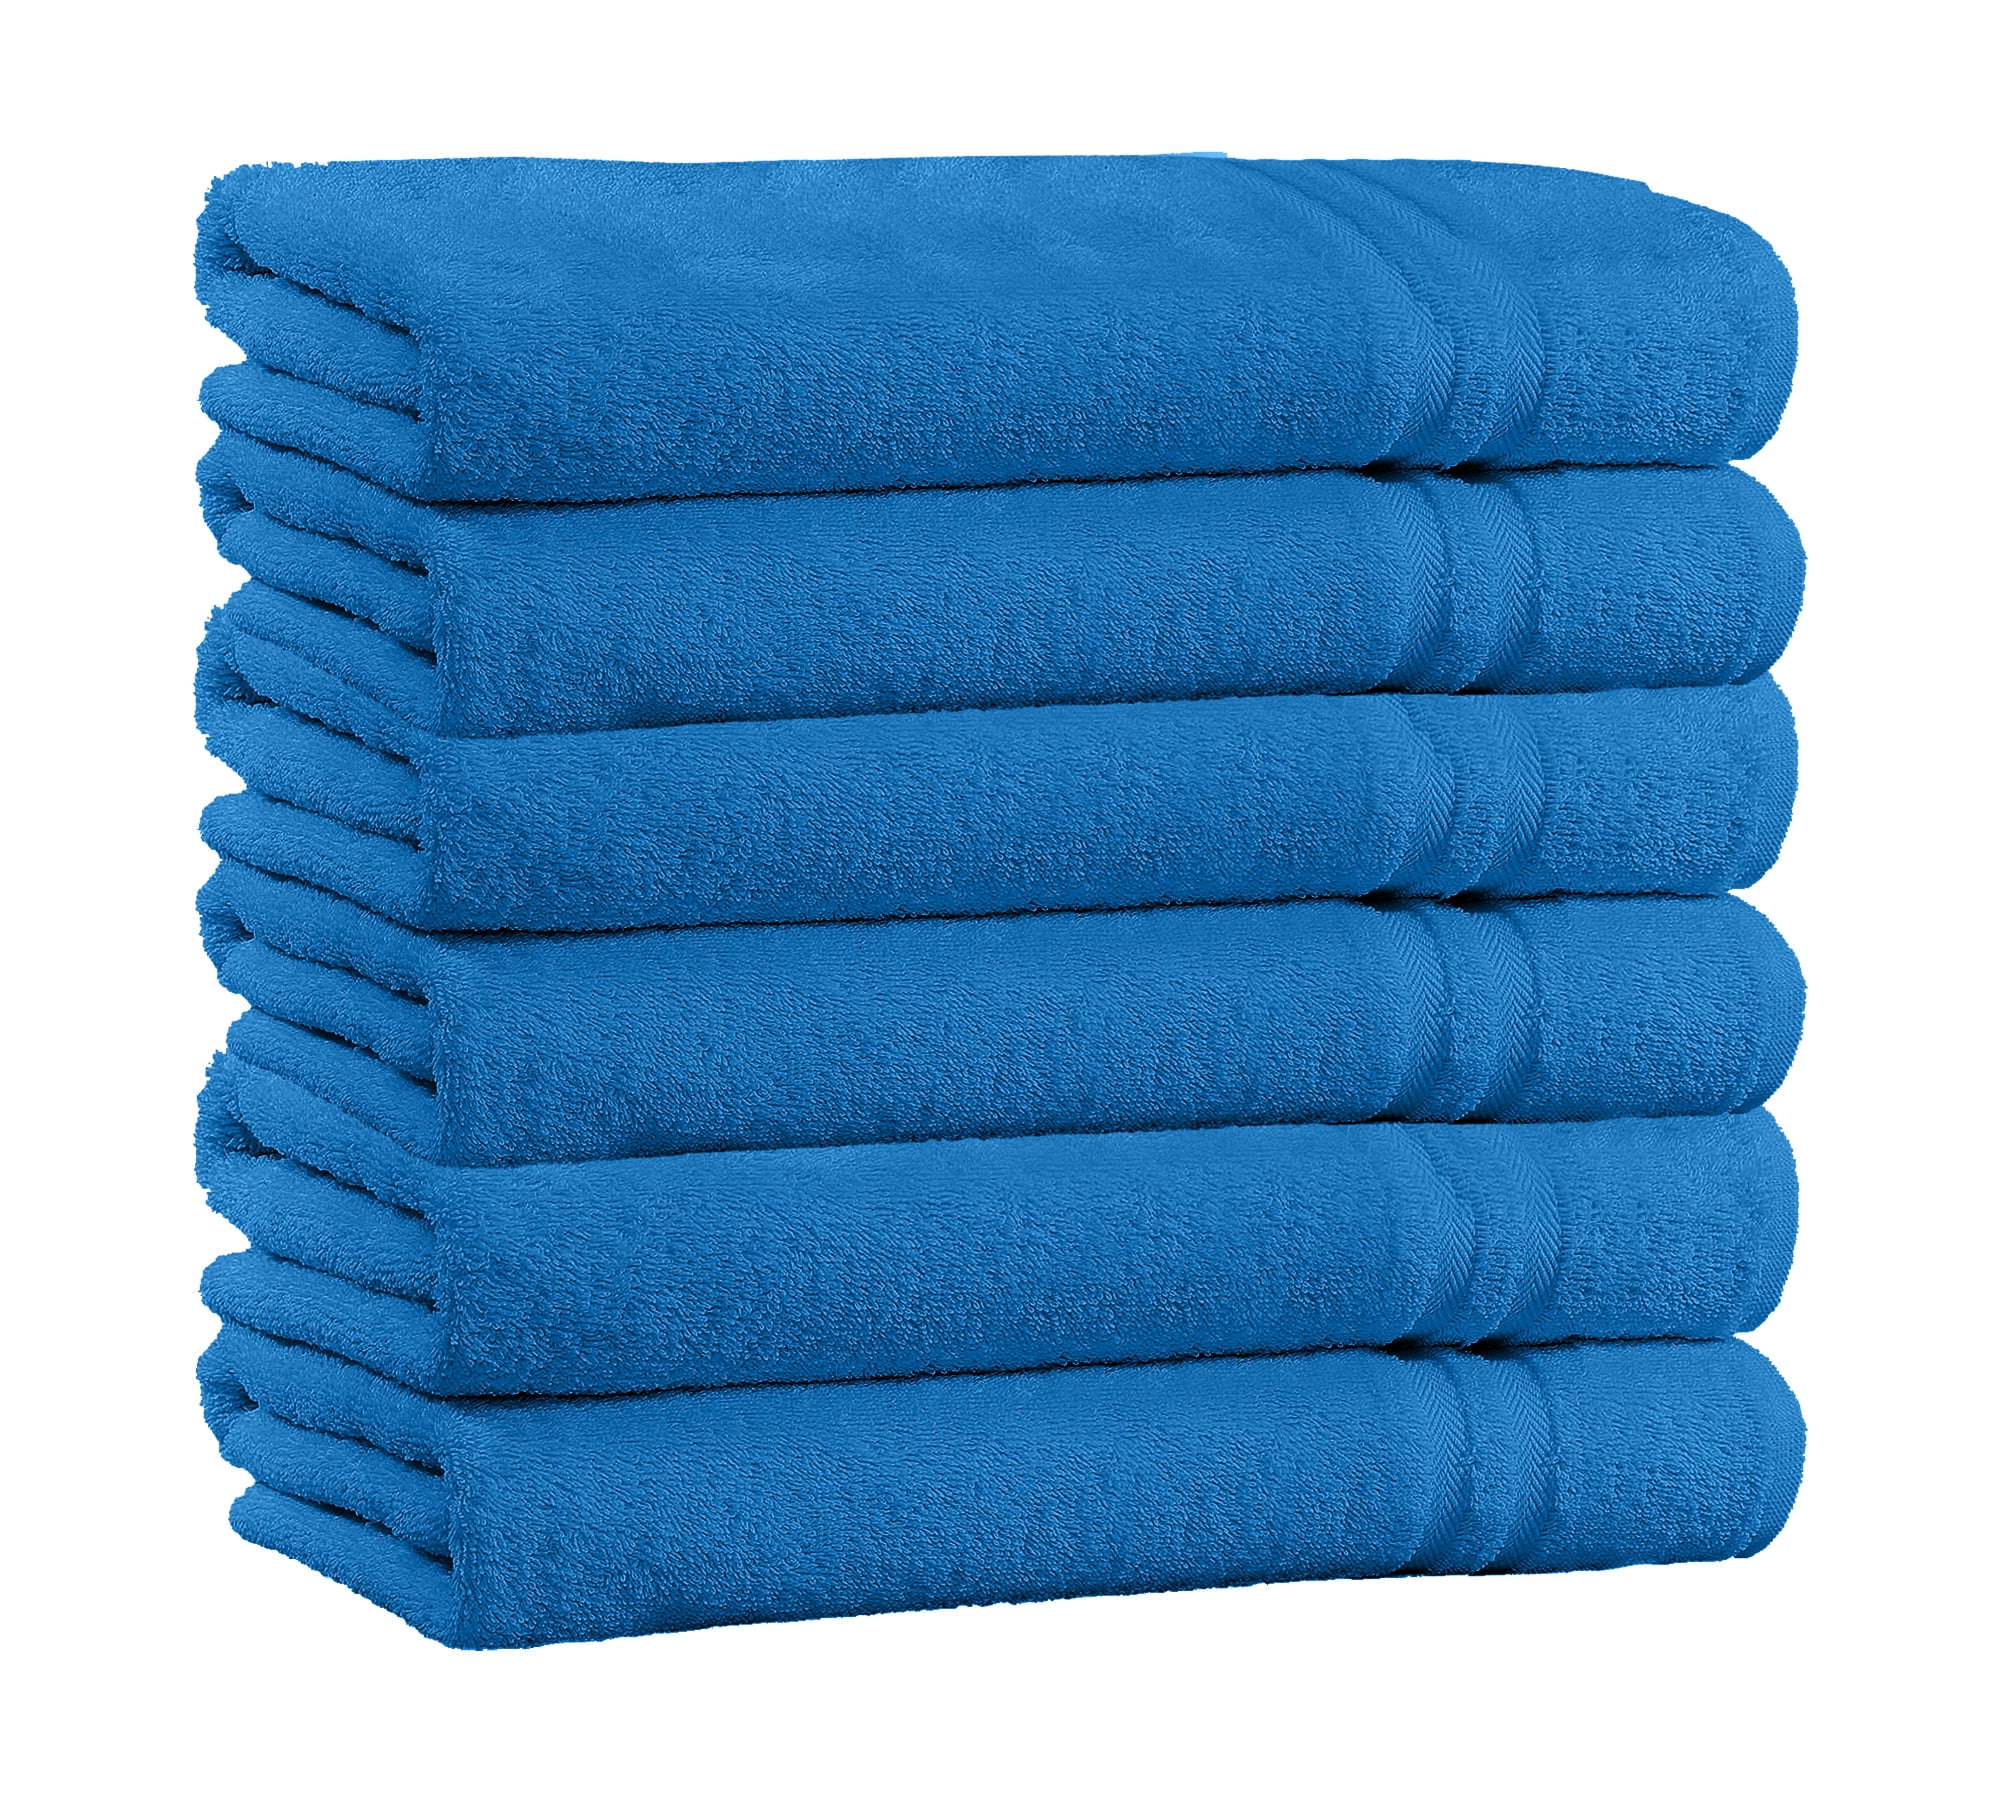 400 GSM Soft Bath Towel Egyptian Cotton 25x50 Inch Assorted Colors 